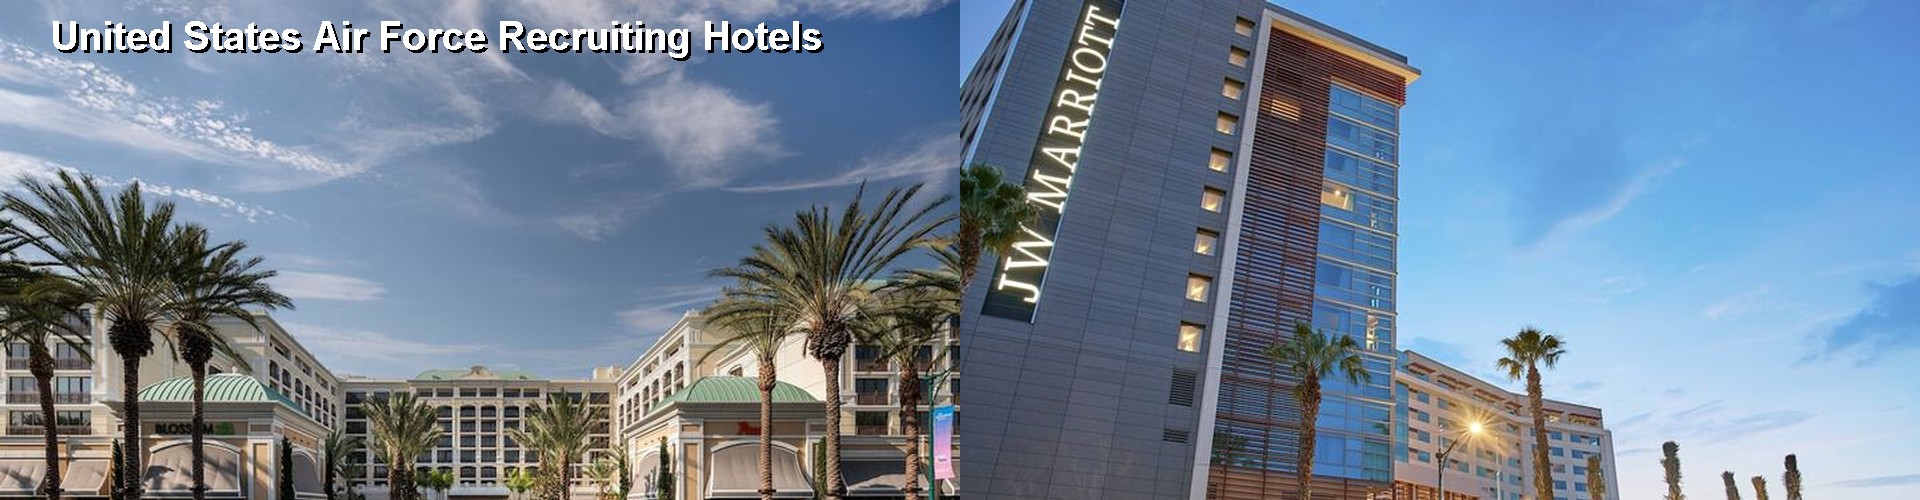 4 Best Hotels near United States Air Force Recruiting